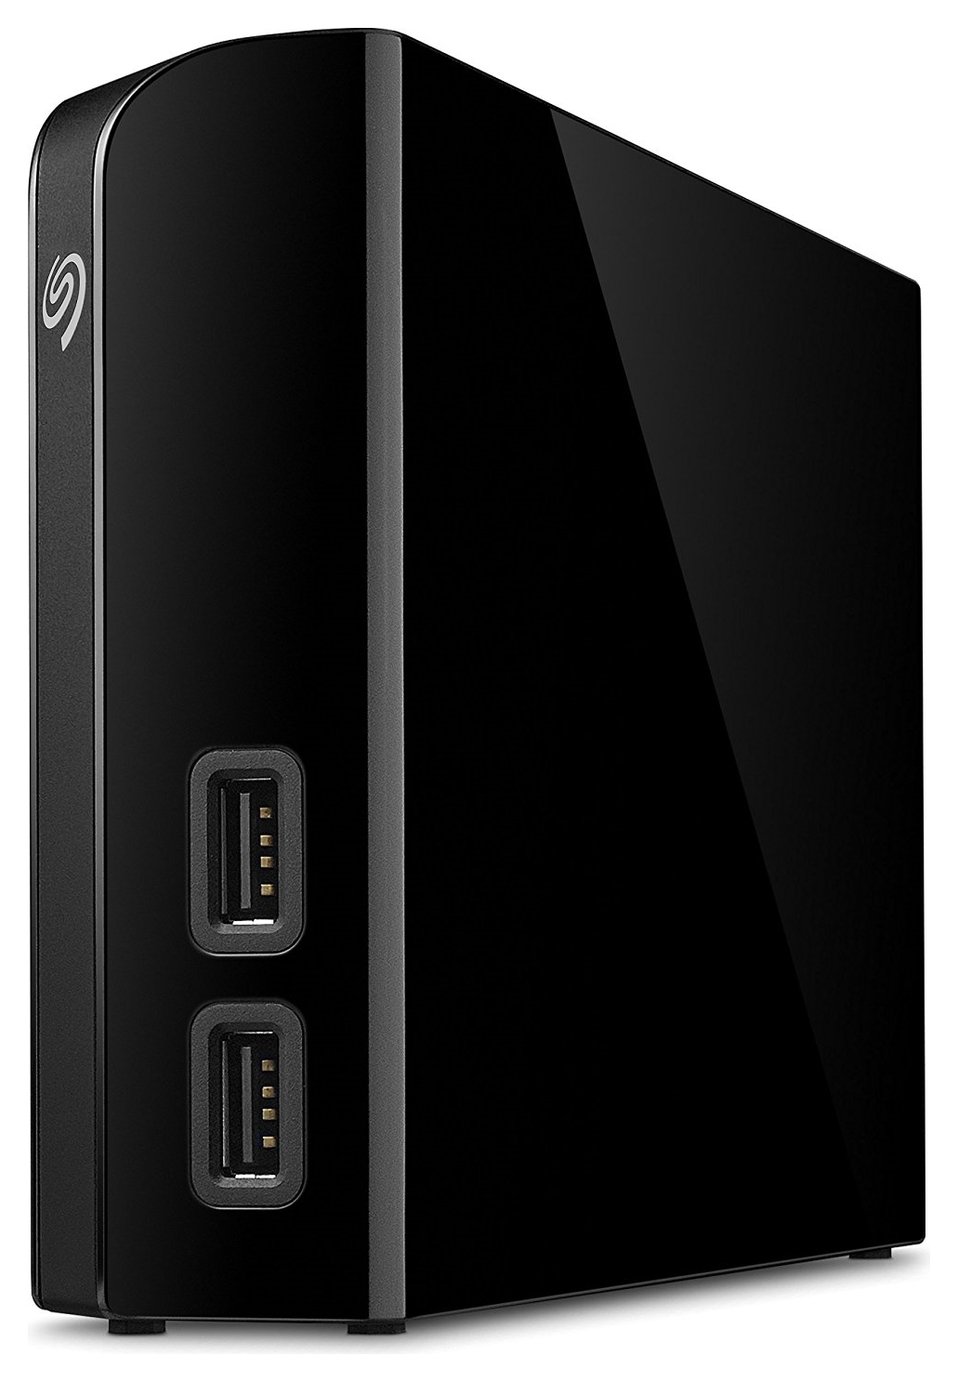 Seagate 8TB Back Up Plus Desktop Hard Drive with USB Hub Review